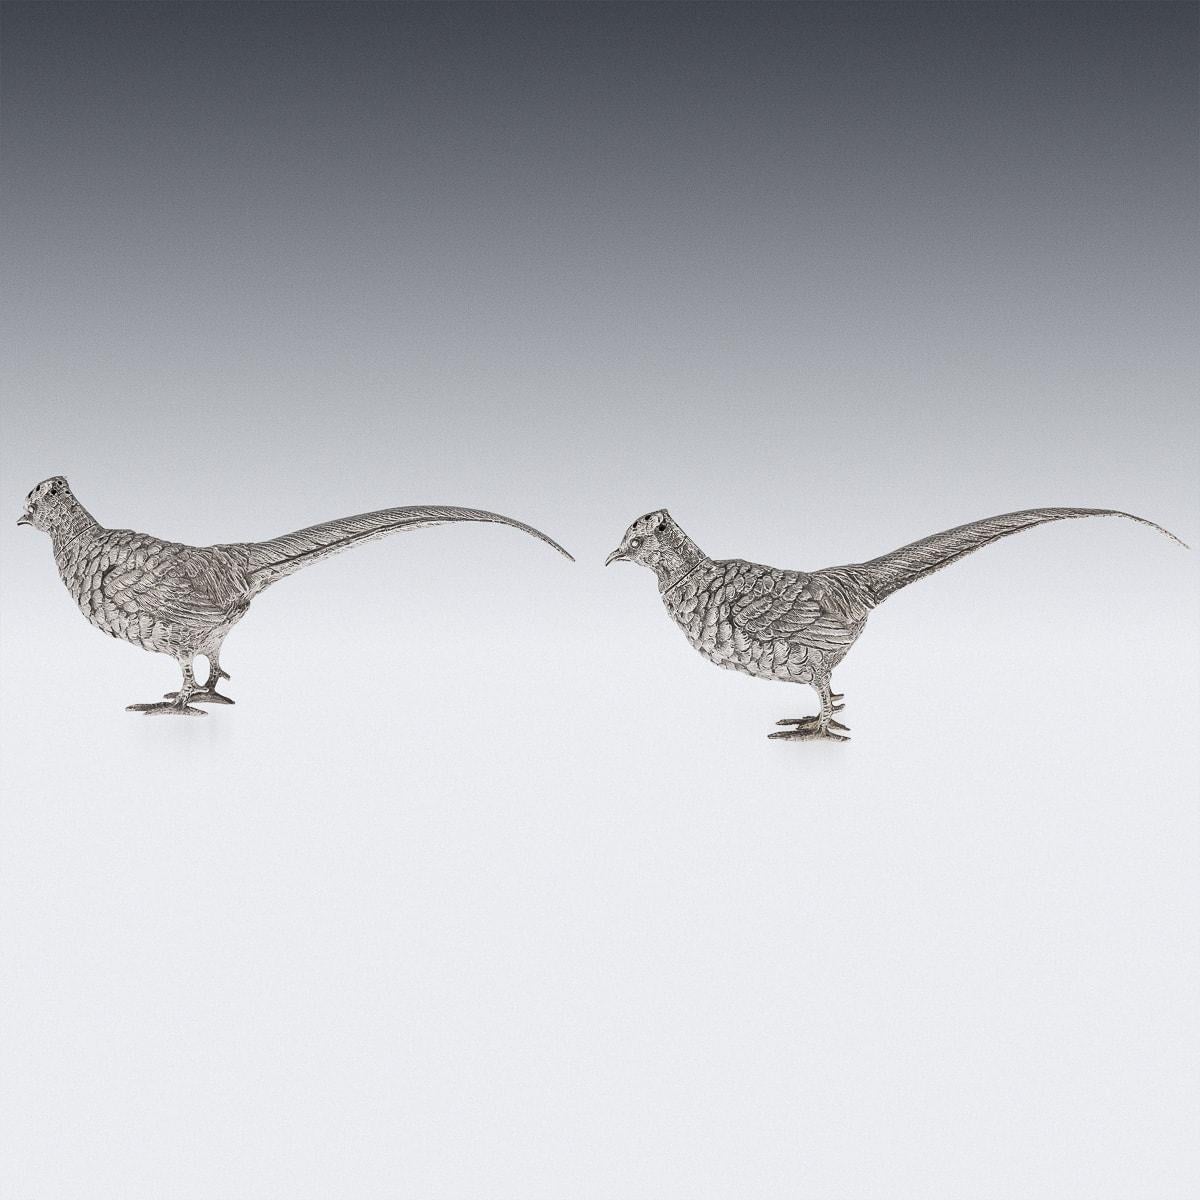 20th Century Edwardian Solid Silver Pheasant Salt & Pepper, London, c.1905 In Good Condition For Sale In Royal Tunbridge Wells, Kent